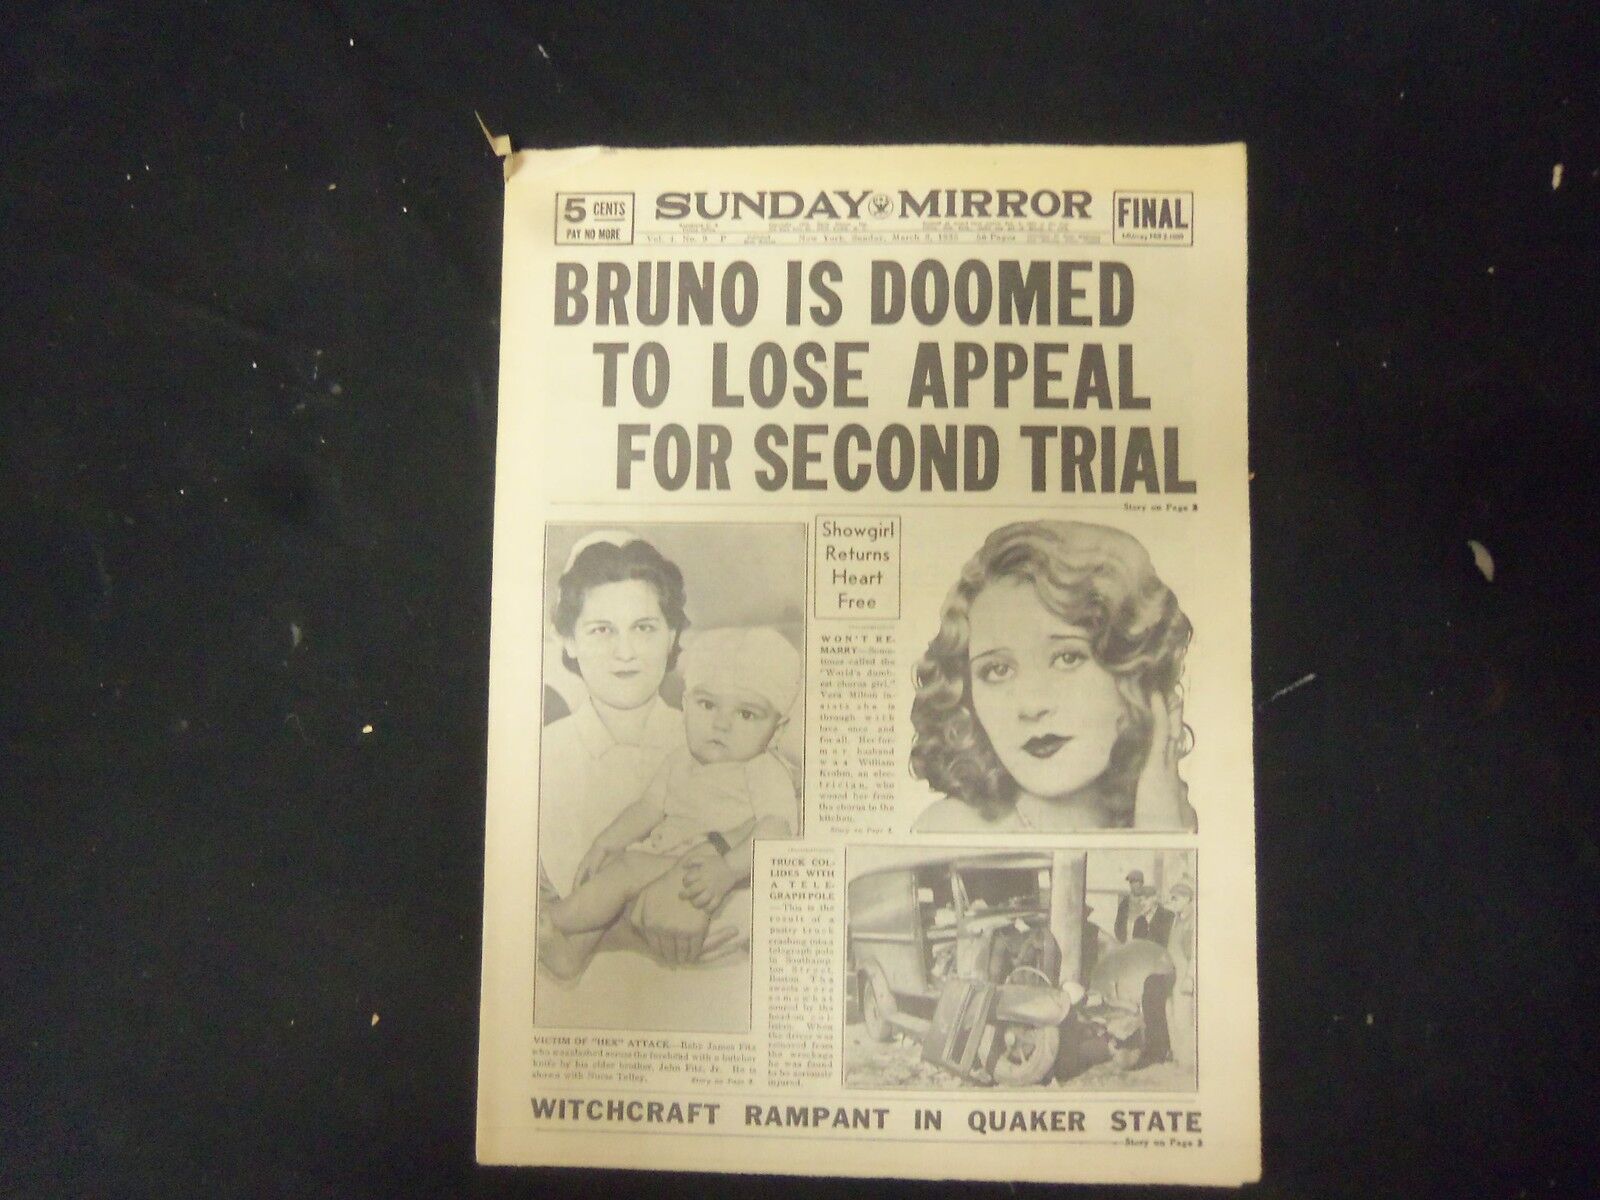 1935 MAR 3 NEW YORK SUNDAY MIRROR-BRUNO DOOMED TO LOSE APPEAL 2ND TRIAL-NP 2253